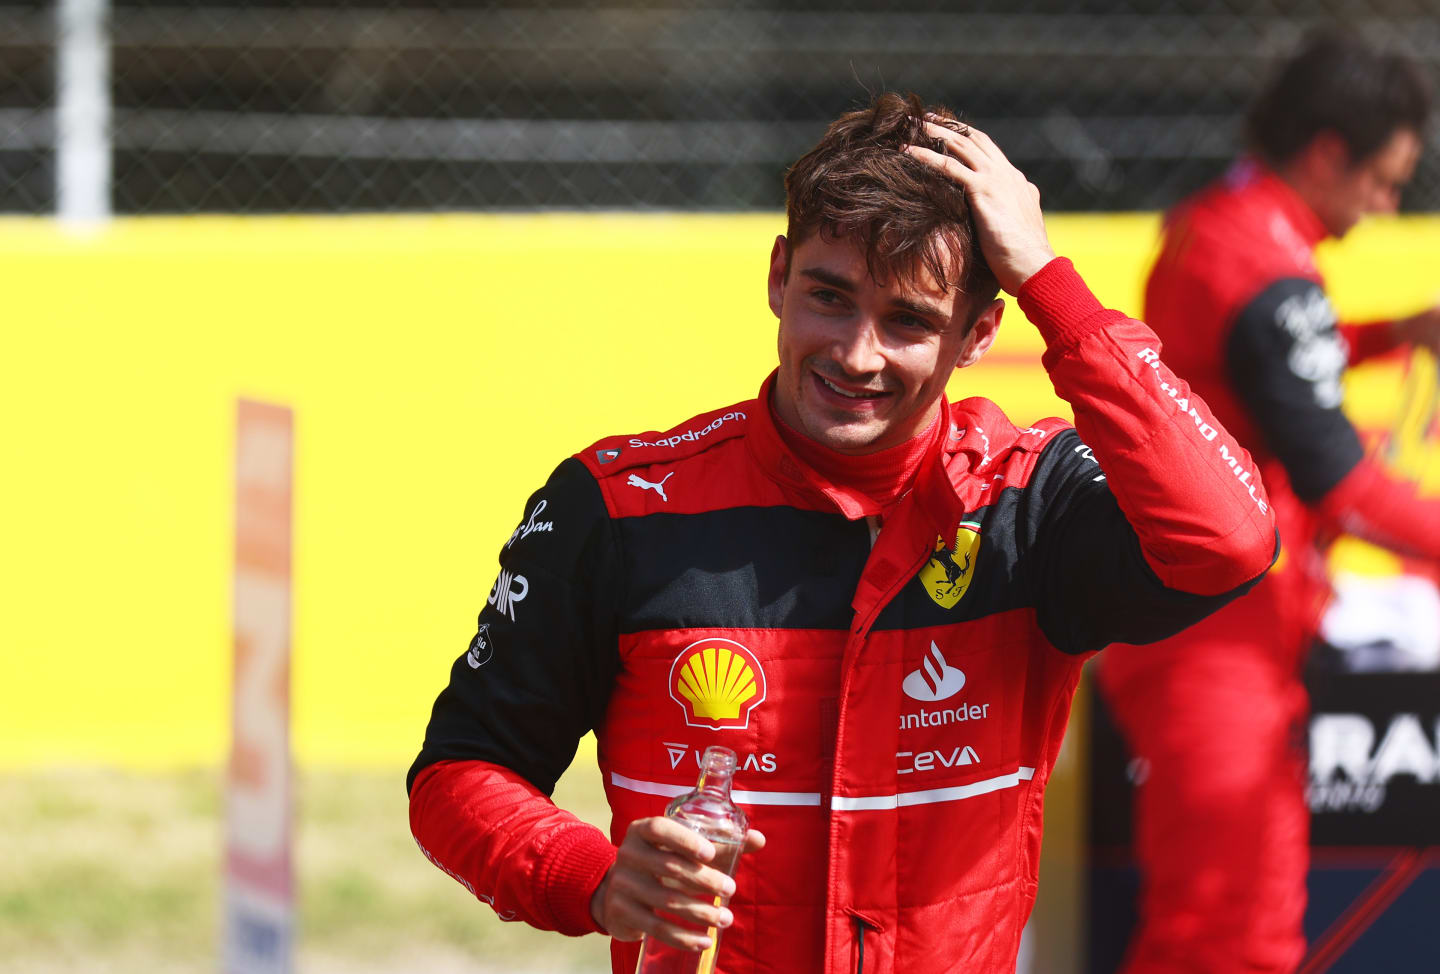 BARCELONA, SPAIN - MAY 21: Pole position qualifier Charles Leclerc of Monaco and Ferrari smiles in parc ferme during qualifying ahead of the F1 Grand Prix of Spain at Circuit de Barcelona-Catalunya on May 21, 2022 in Barcelona, Spain. (Photo by Mark Thompson/Getty Images)